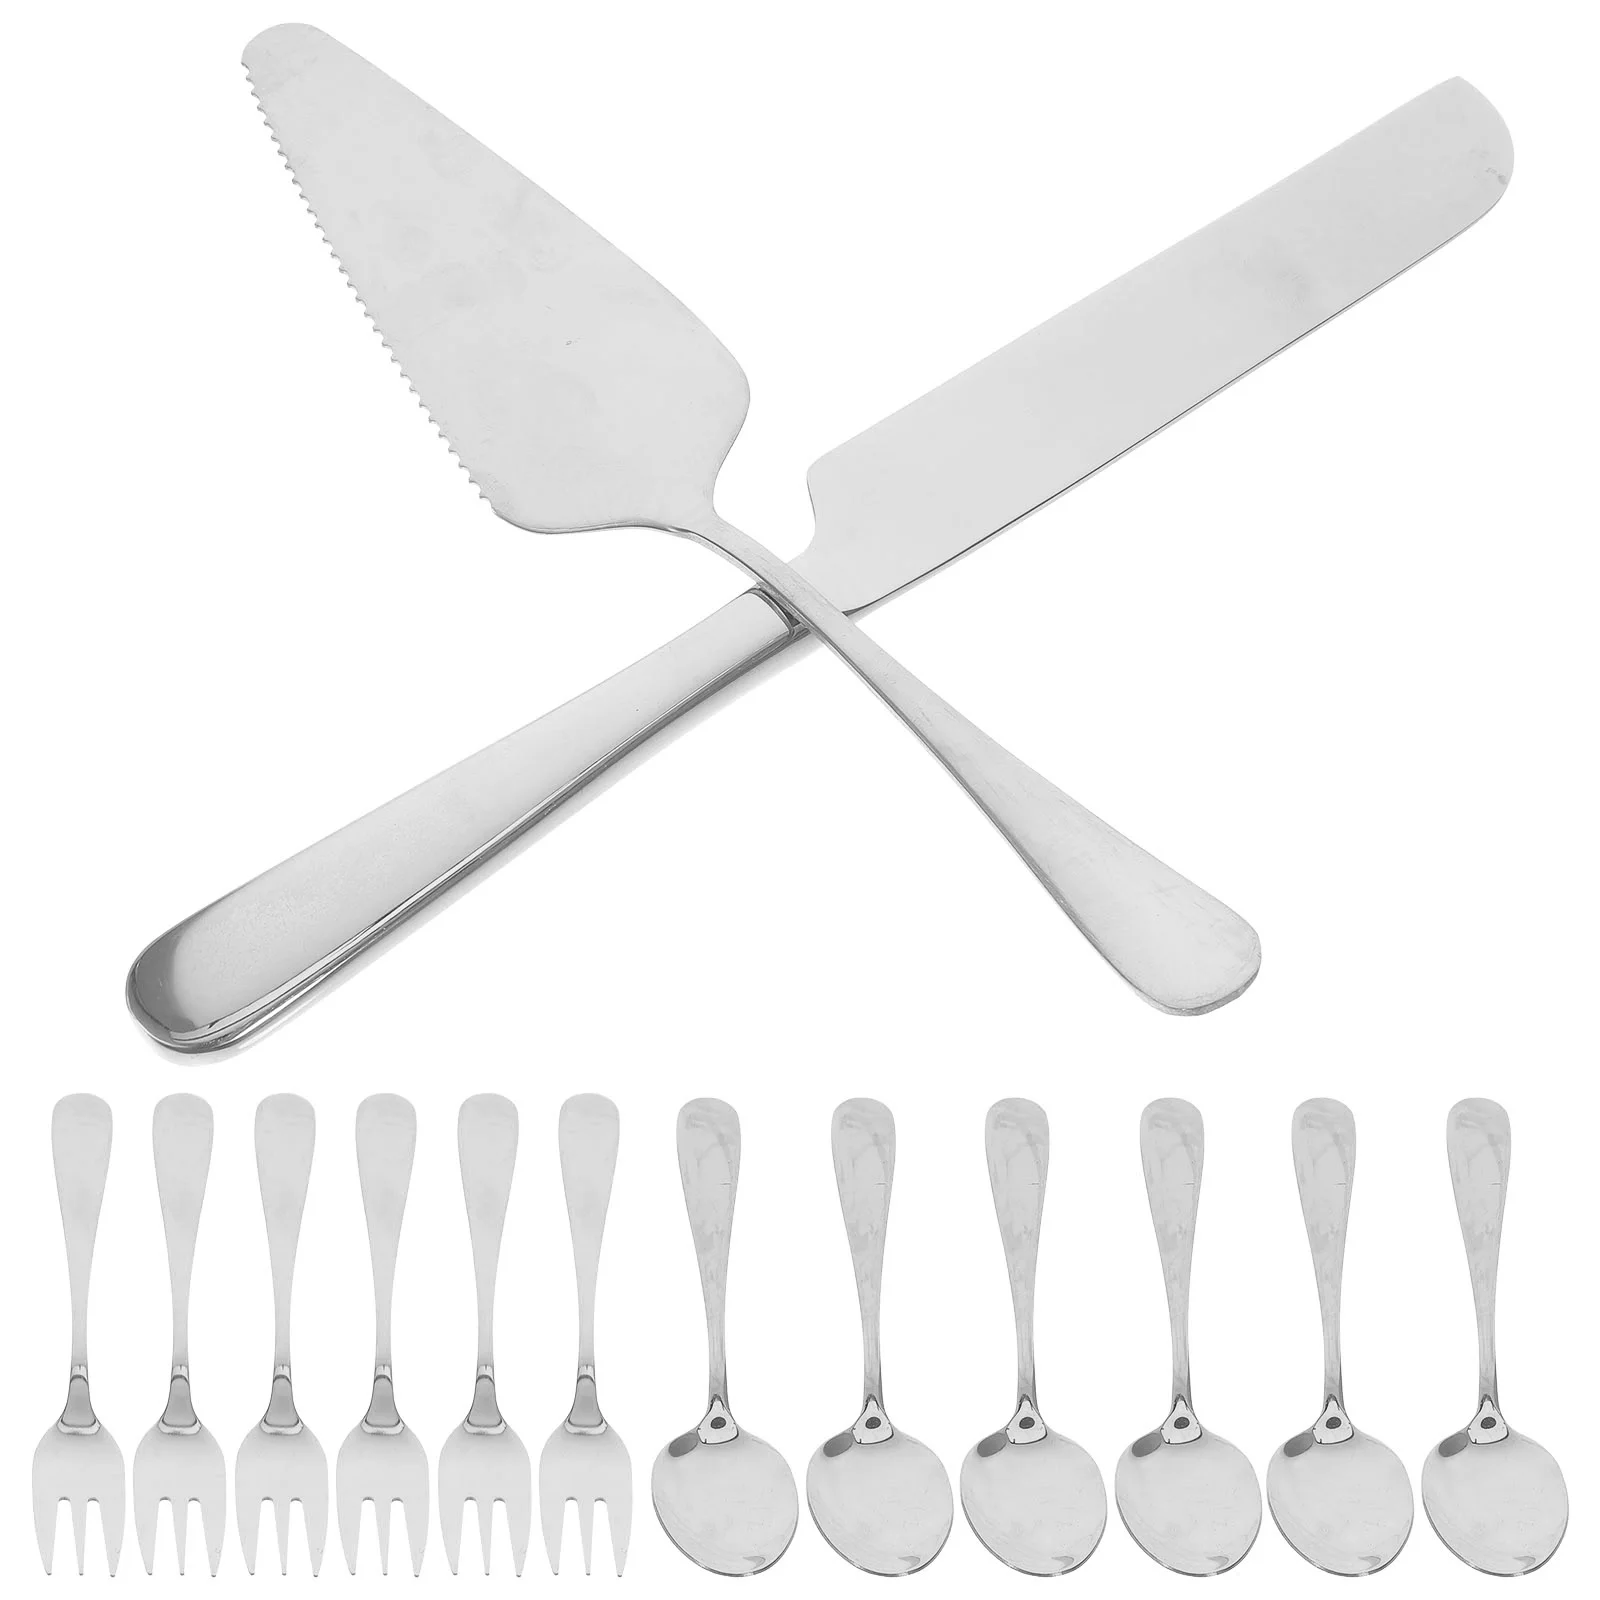 

Fork Knife Combination Cake Supplies Kitchen Spatula Banquet Tools Dividing Stainless Steel Cutting Cocktail